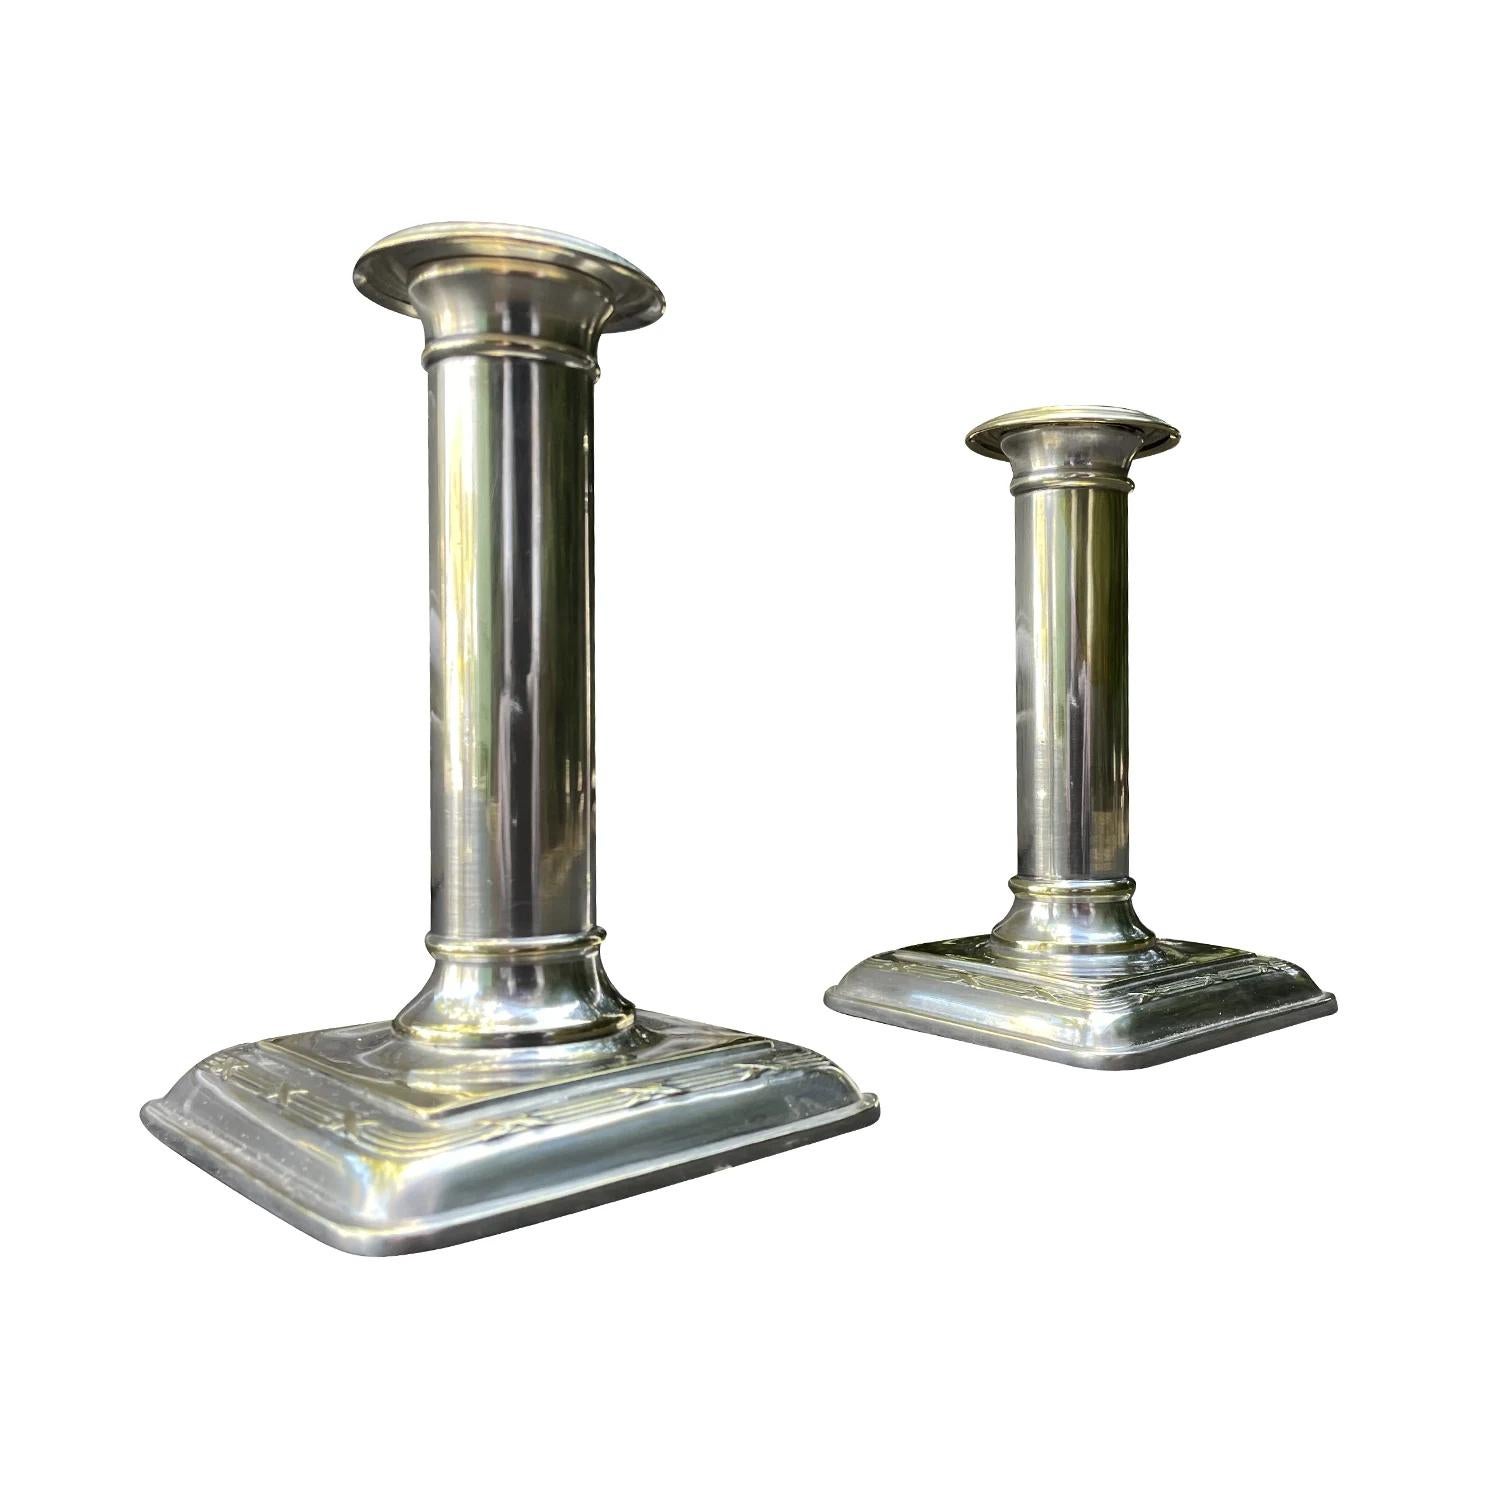 A vintage Art Deco Swedish pair of Ljusstake, candle holders made of hand crafted nickel silver, produced by C.G. Hallberg in good condition. The small Scandinavian candlesticks are enhanced by detailed hand crafting décor. Wear consistent with age